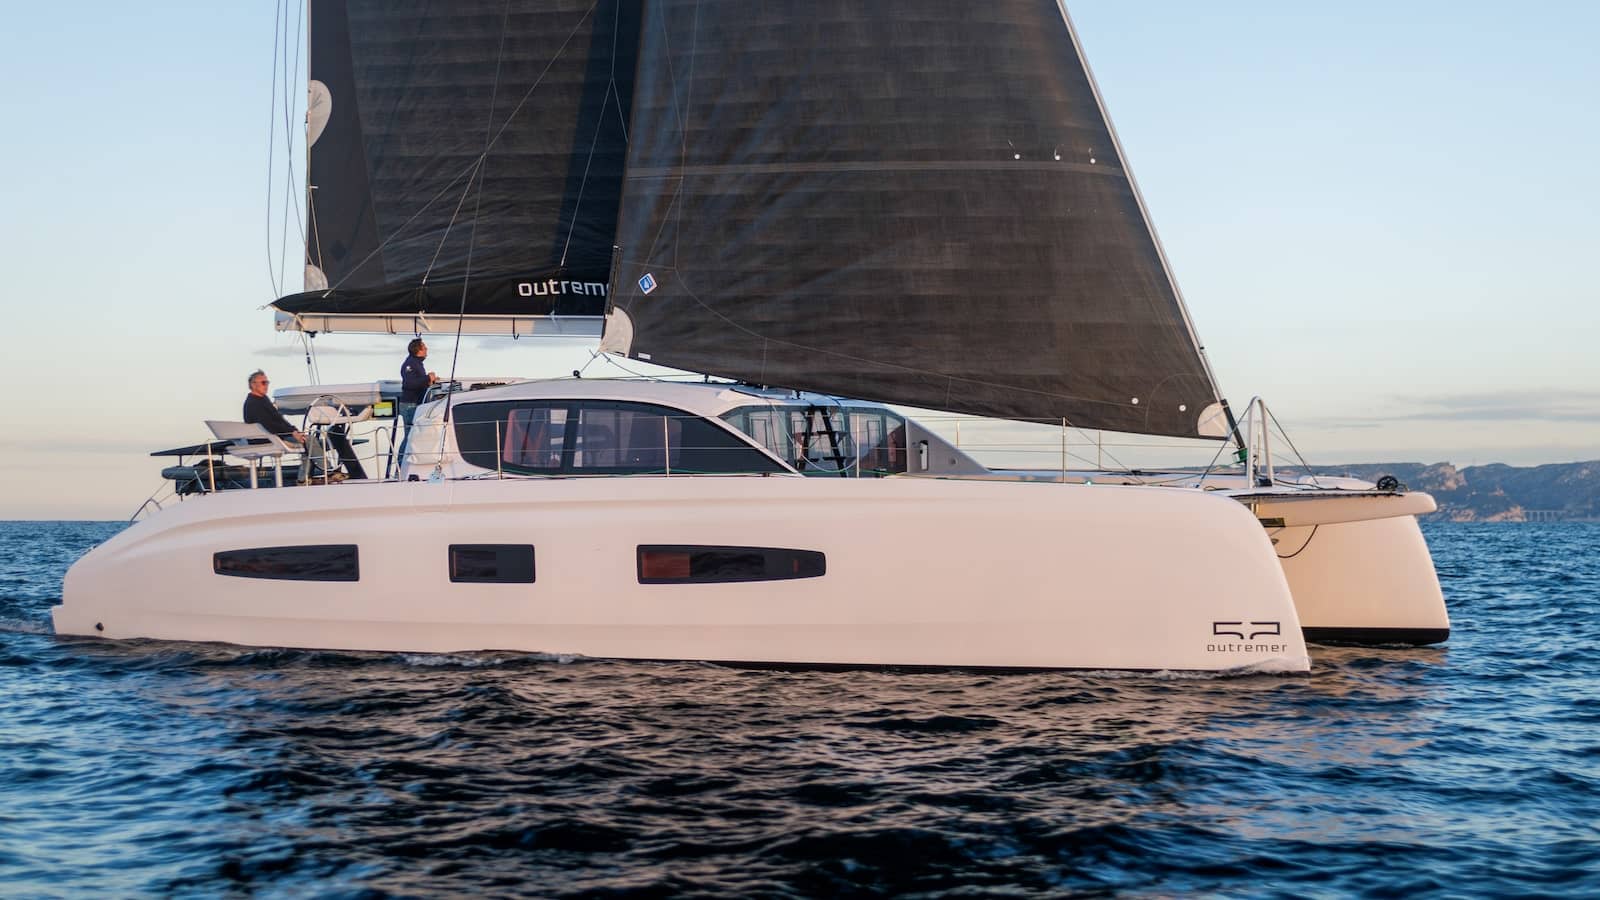 Outremer 52 at sea